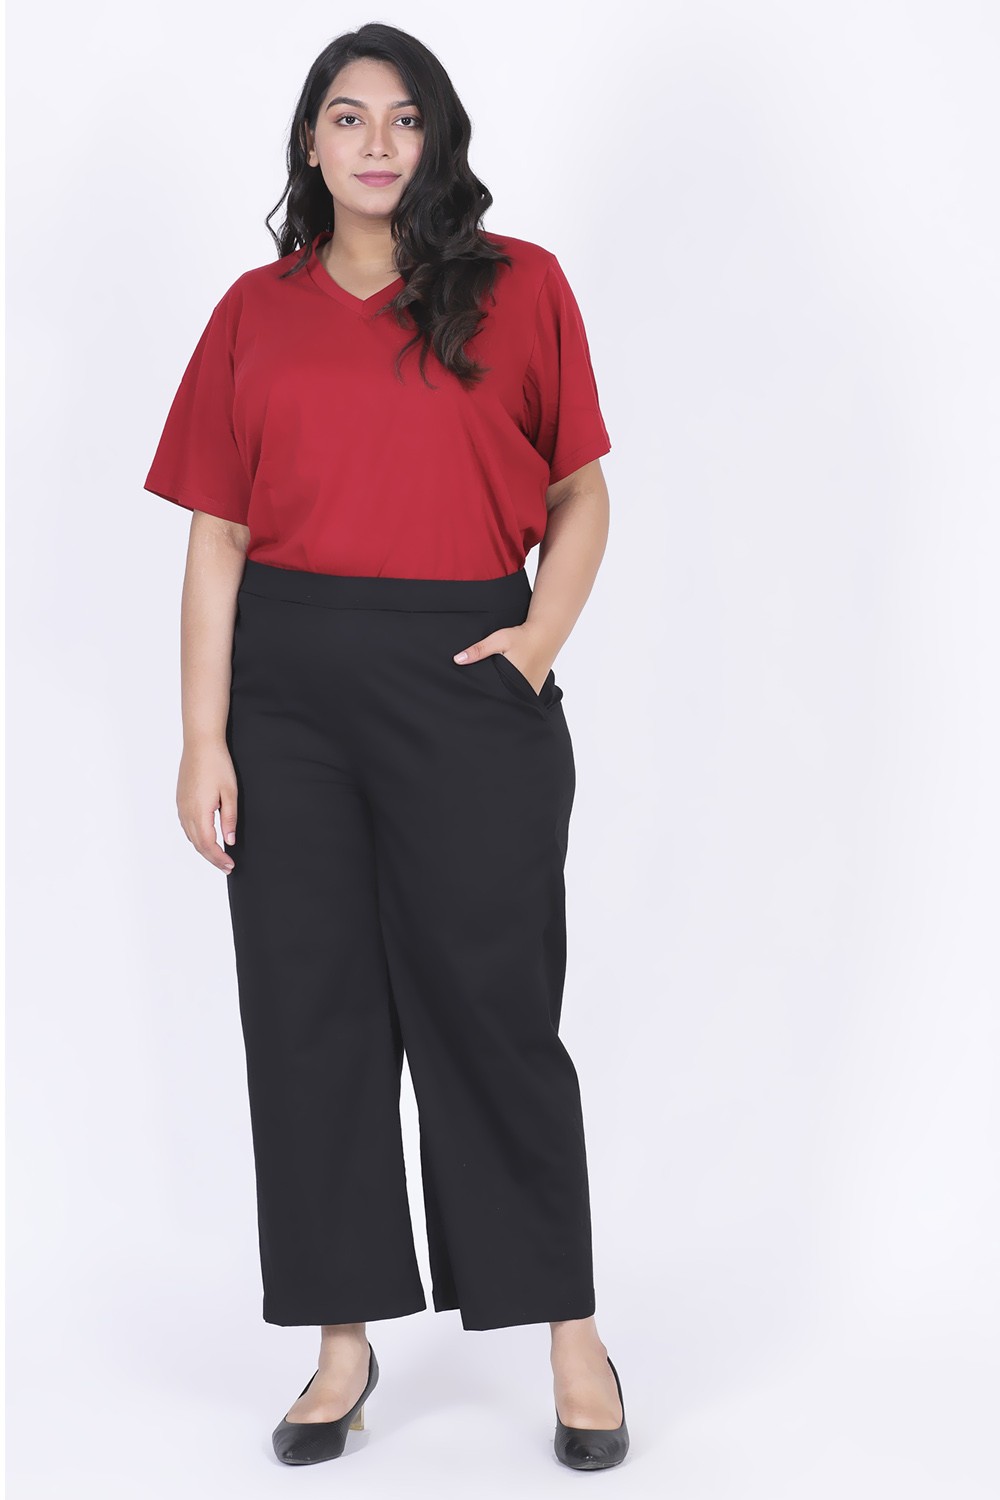 Powersutra Trousers and Pants  Buy Powersutra Stretch Pants  Black Online   Nykaa Fashion